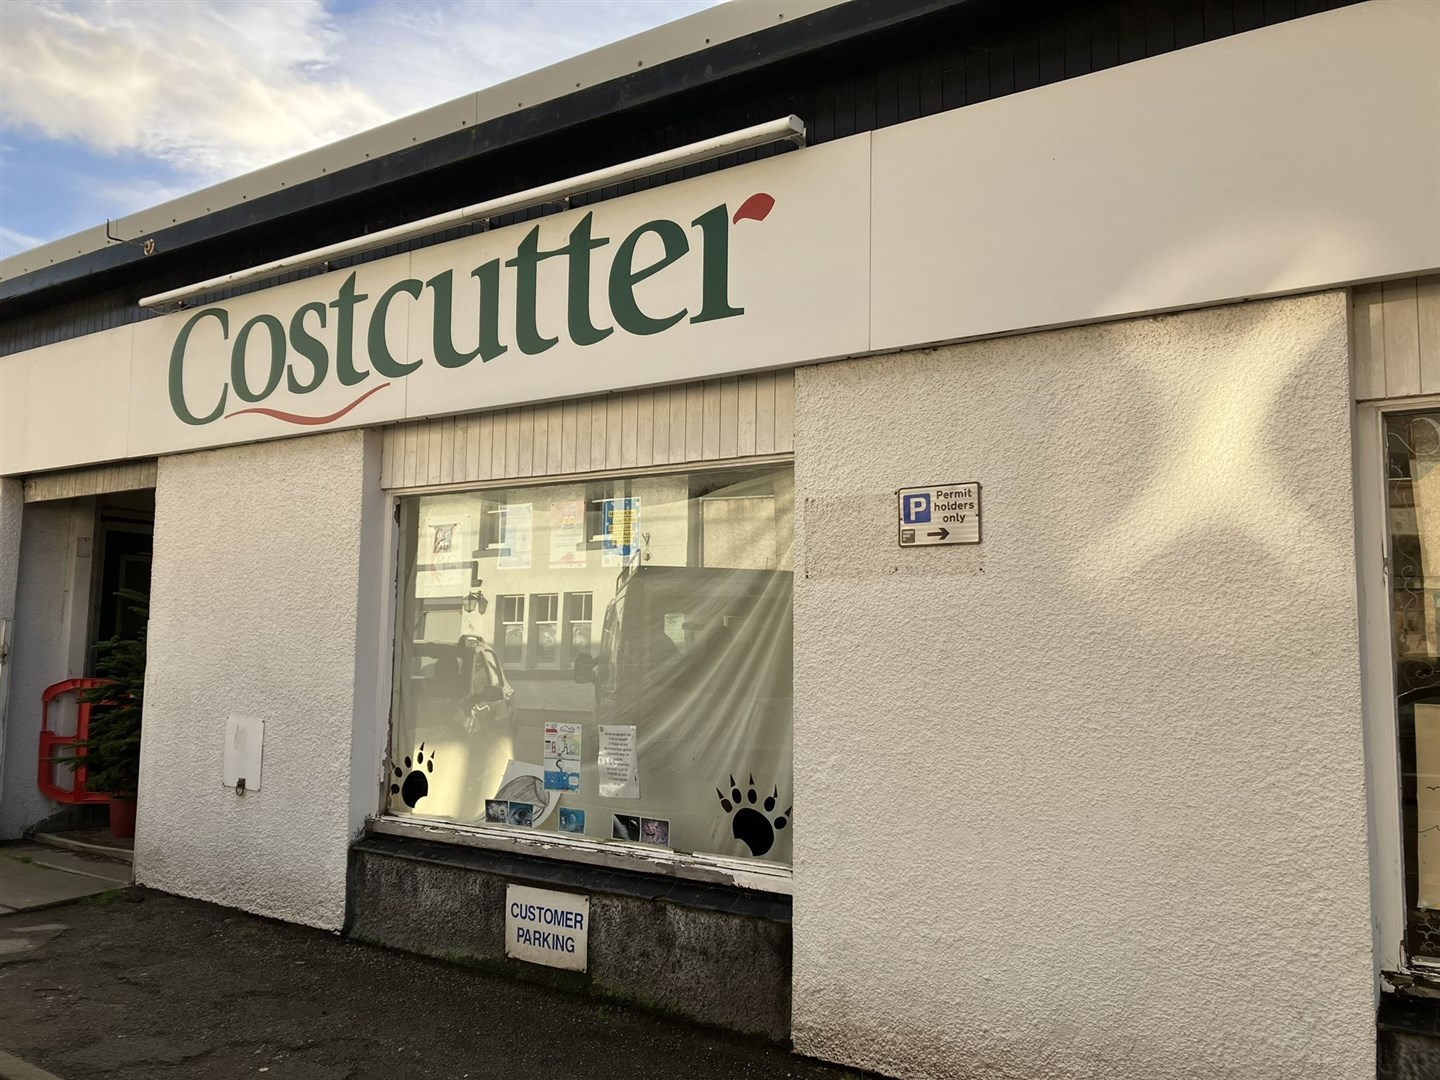 Ullapool Costcutters, closed in 2013.